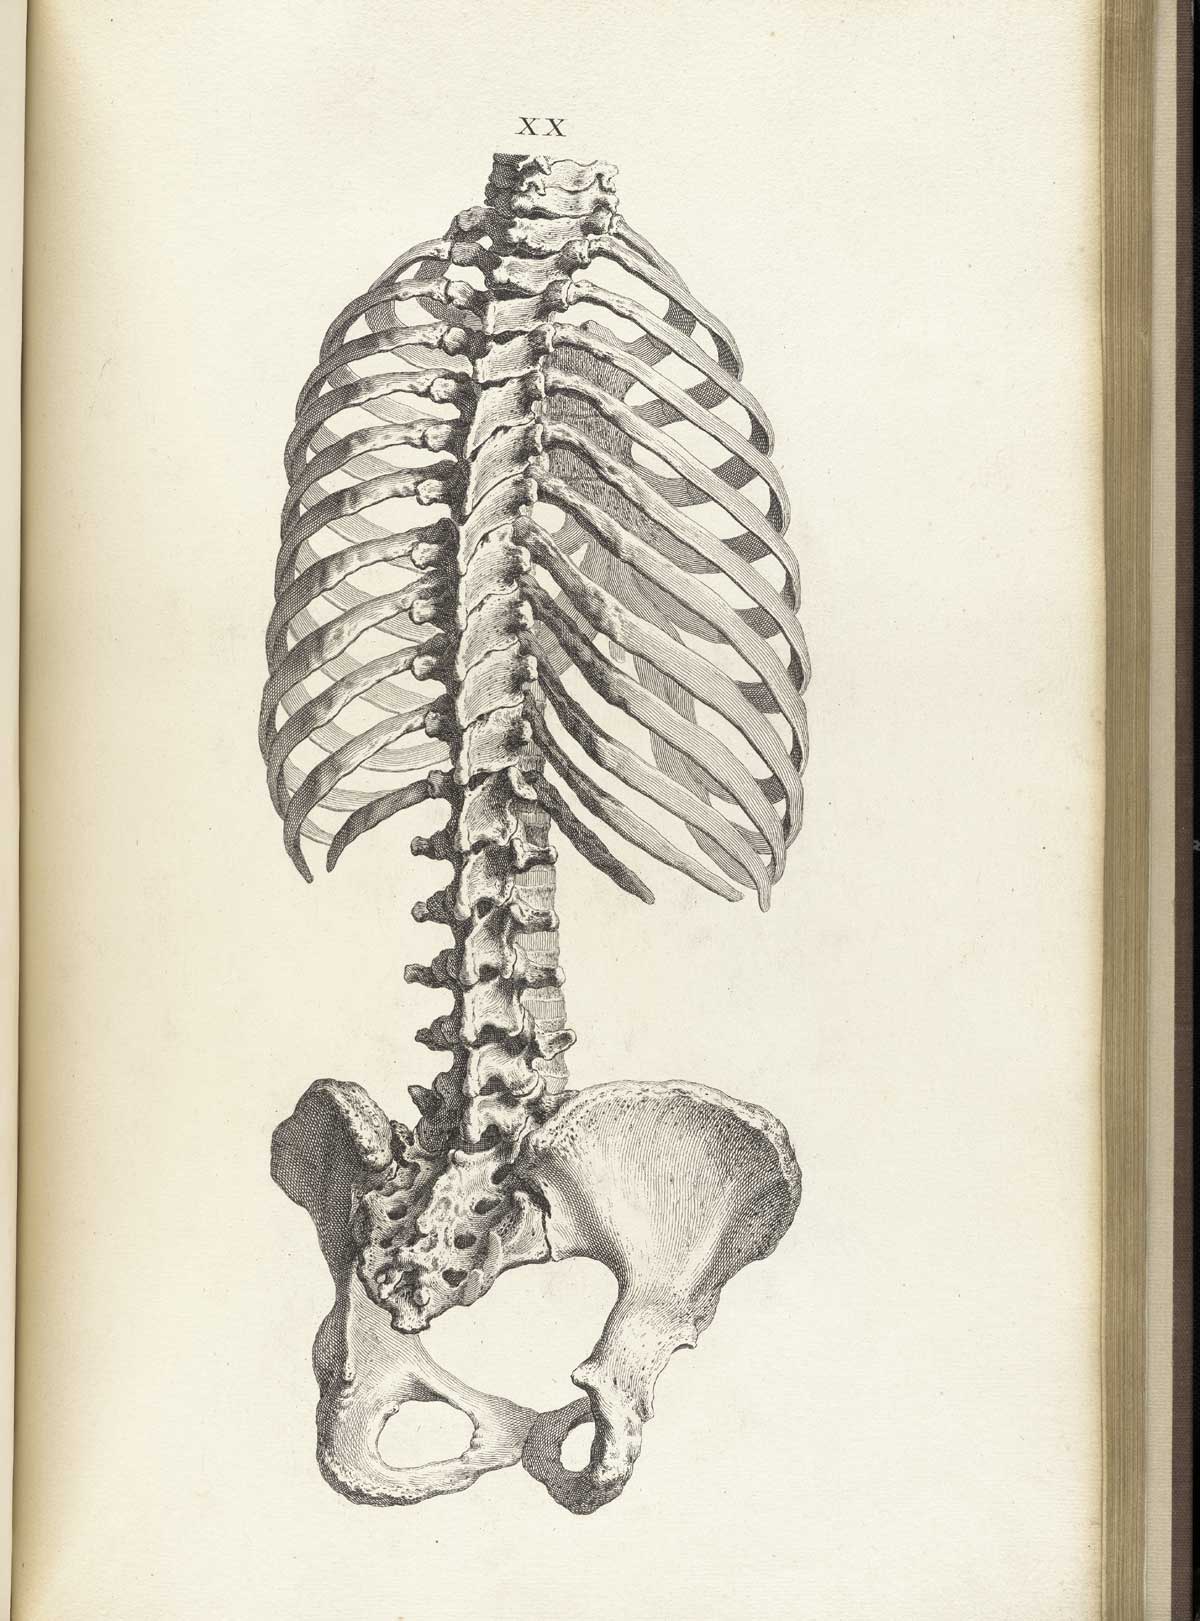 Engraving of the posterior view of the trunk of a skeleton, including rib cage, vertebral column and pelvis, from William Cheselden’s Osteographia, NLM Call no.: WZ 260 C499o 1733.